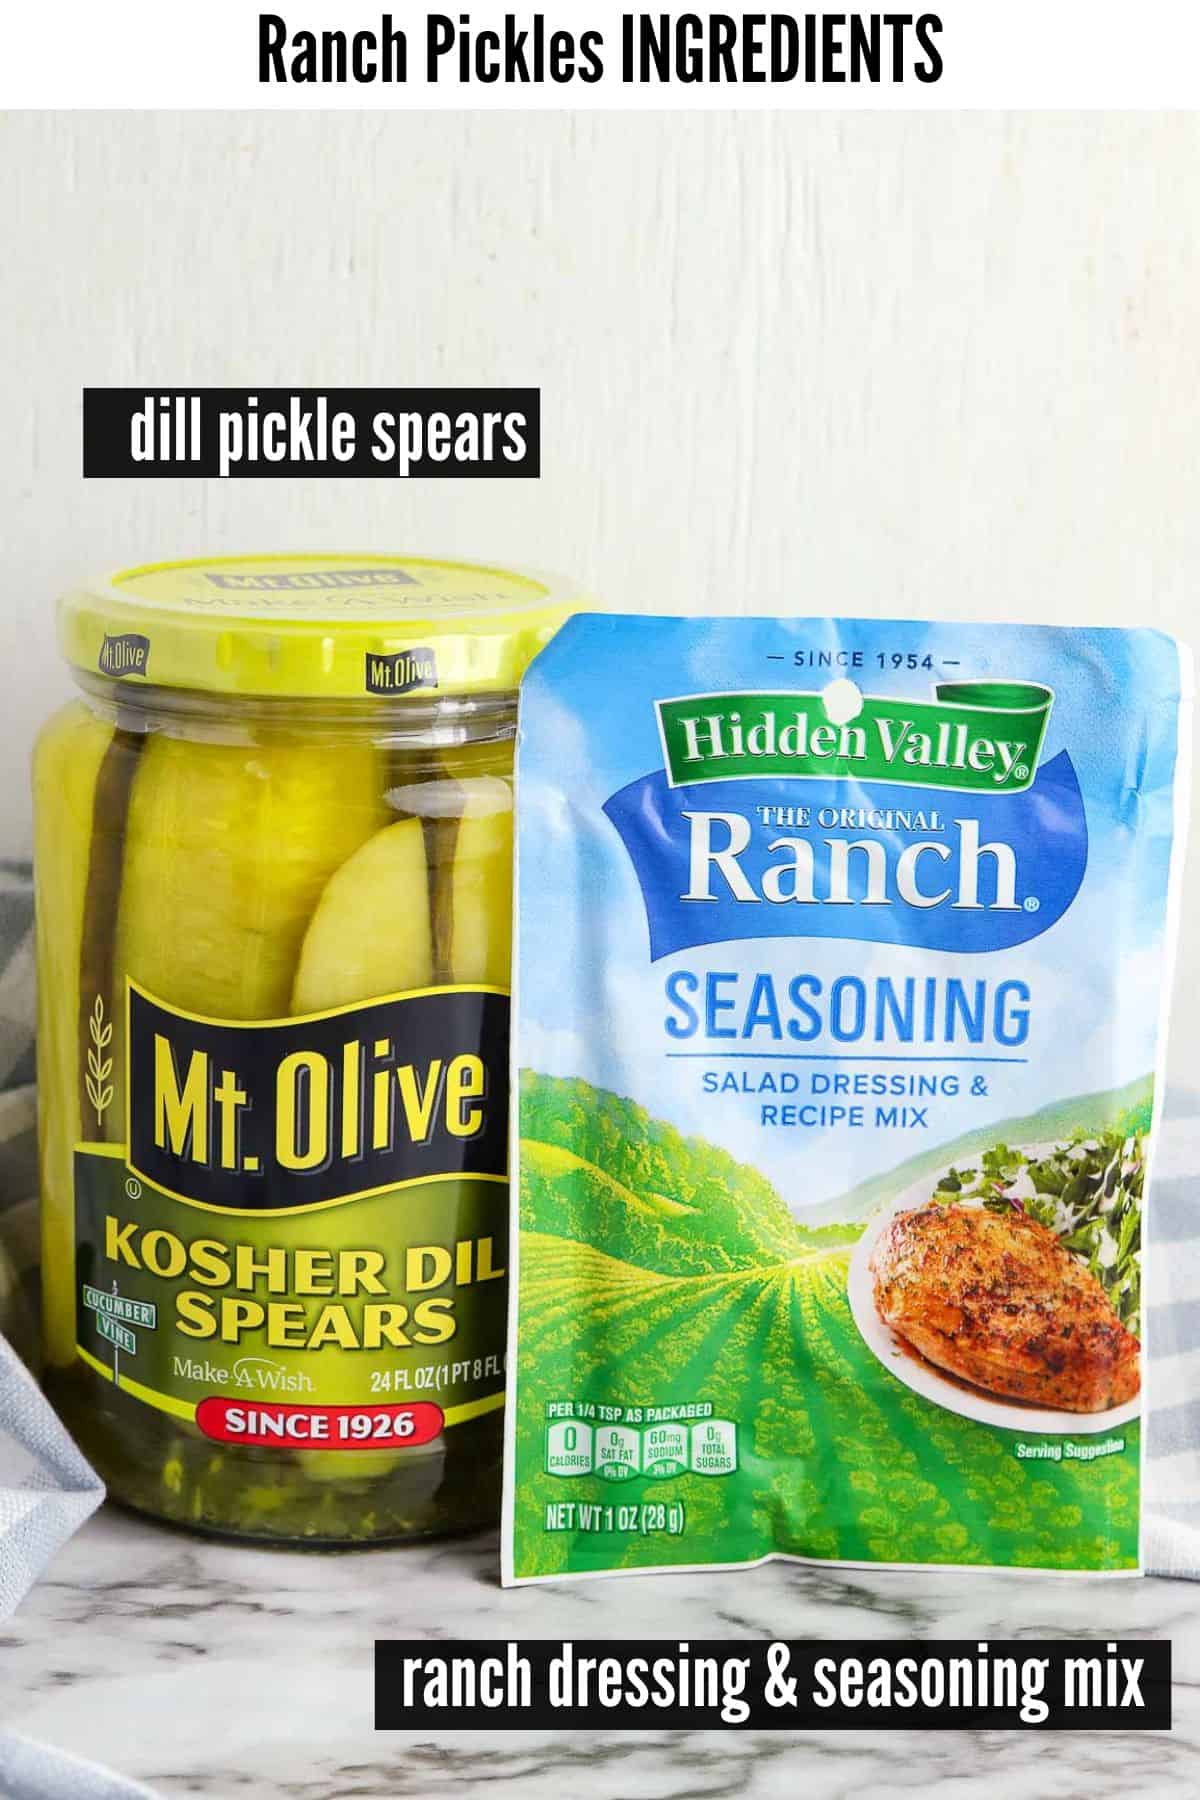 ranch pickles labelled ingredients.